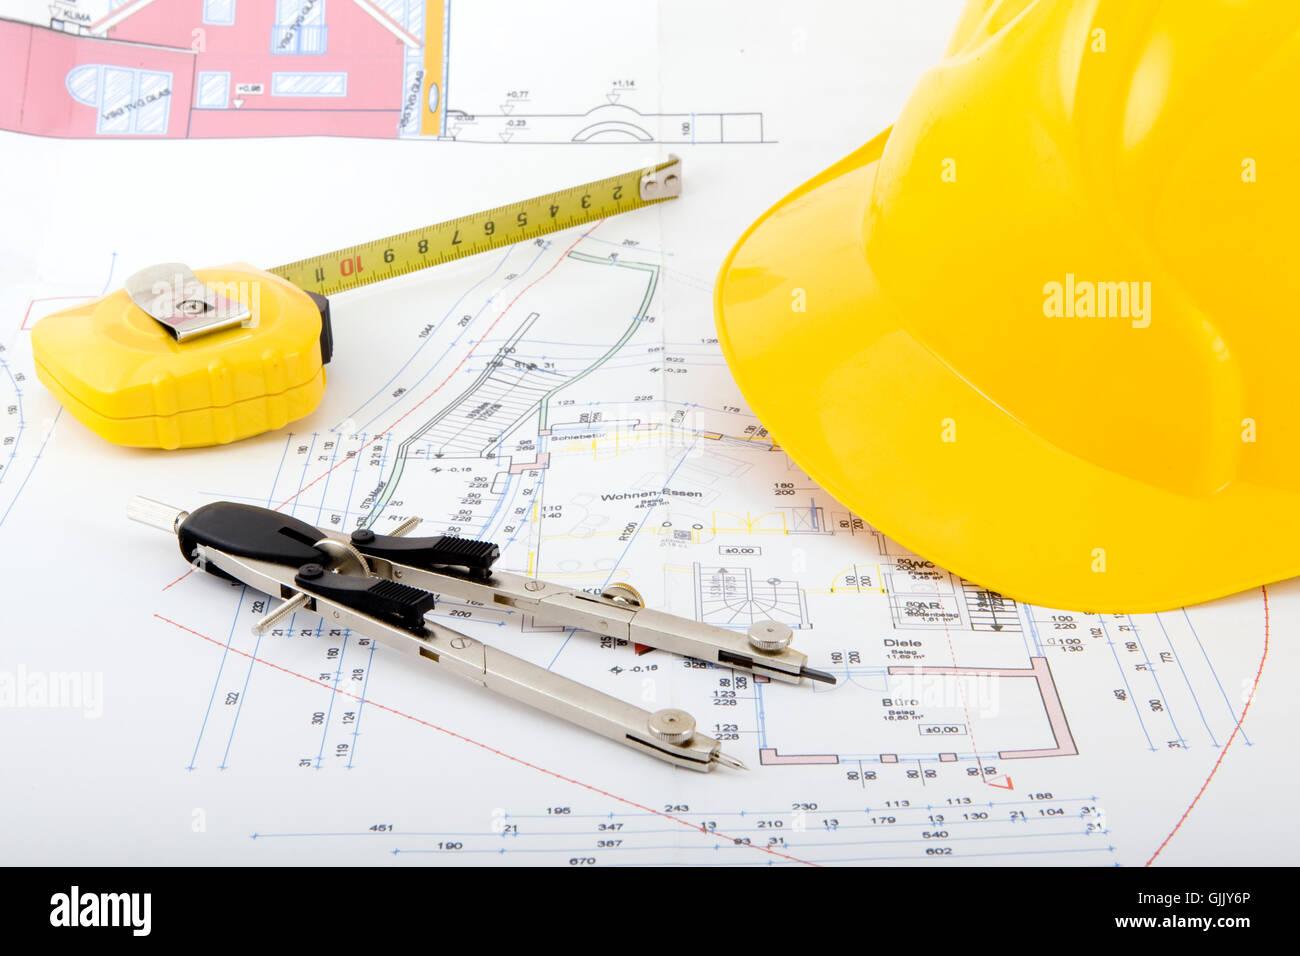 style of construction architecture architectural style Stock Photo